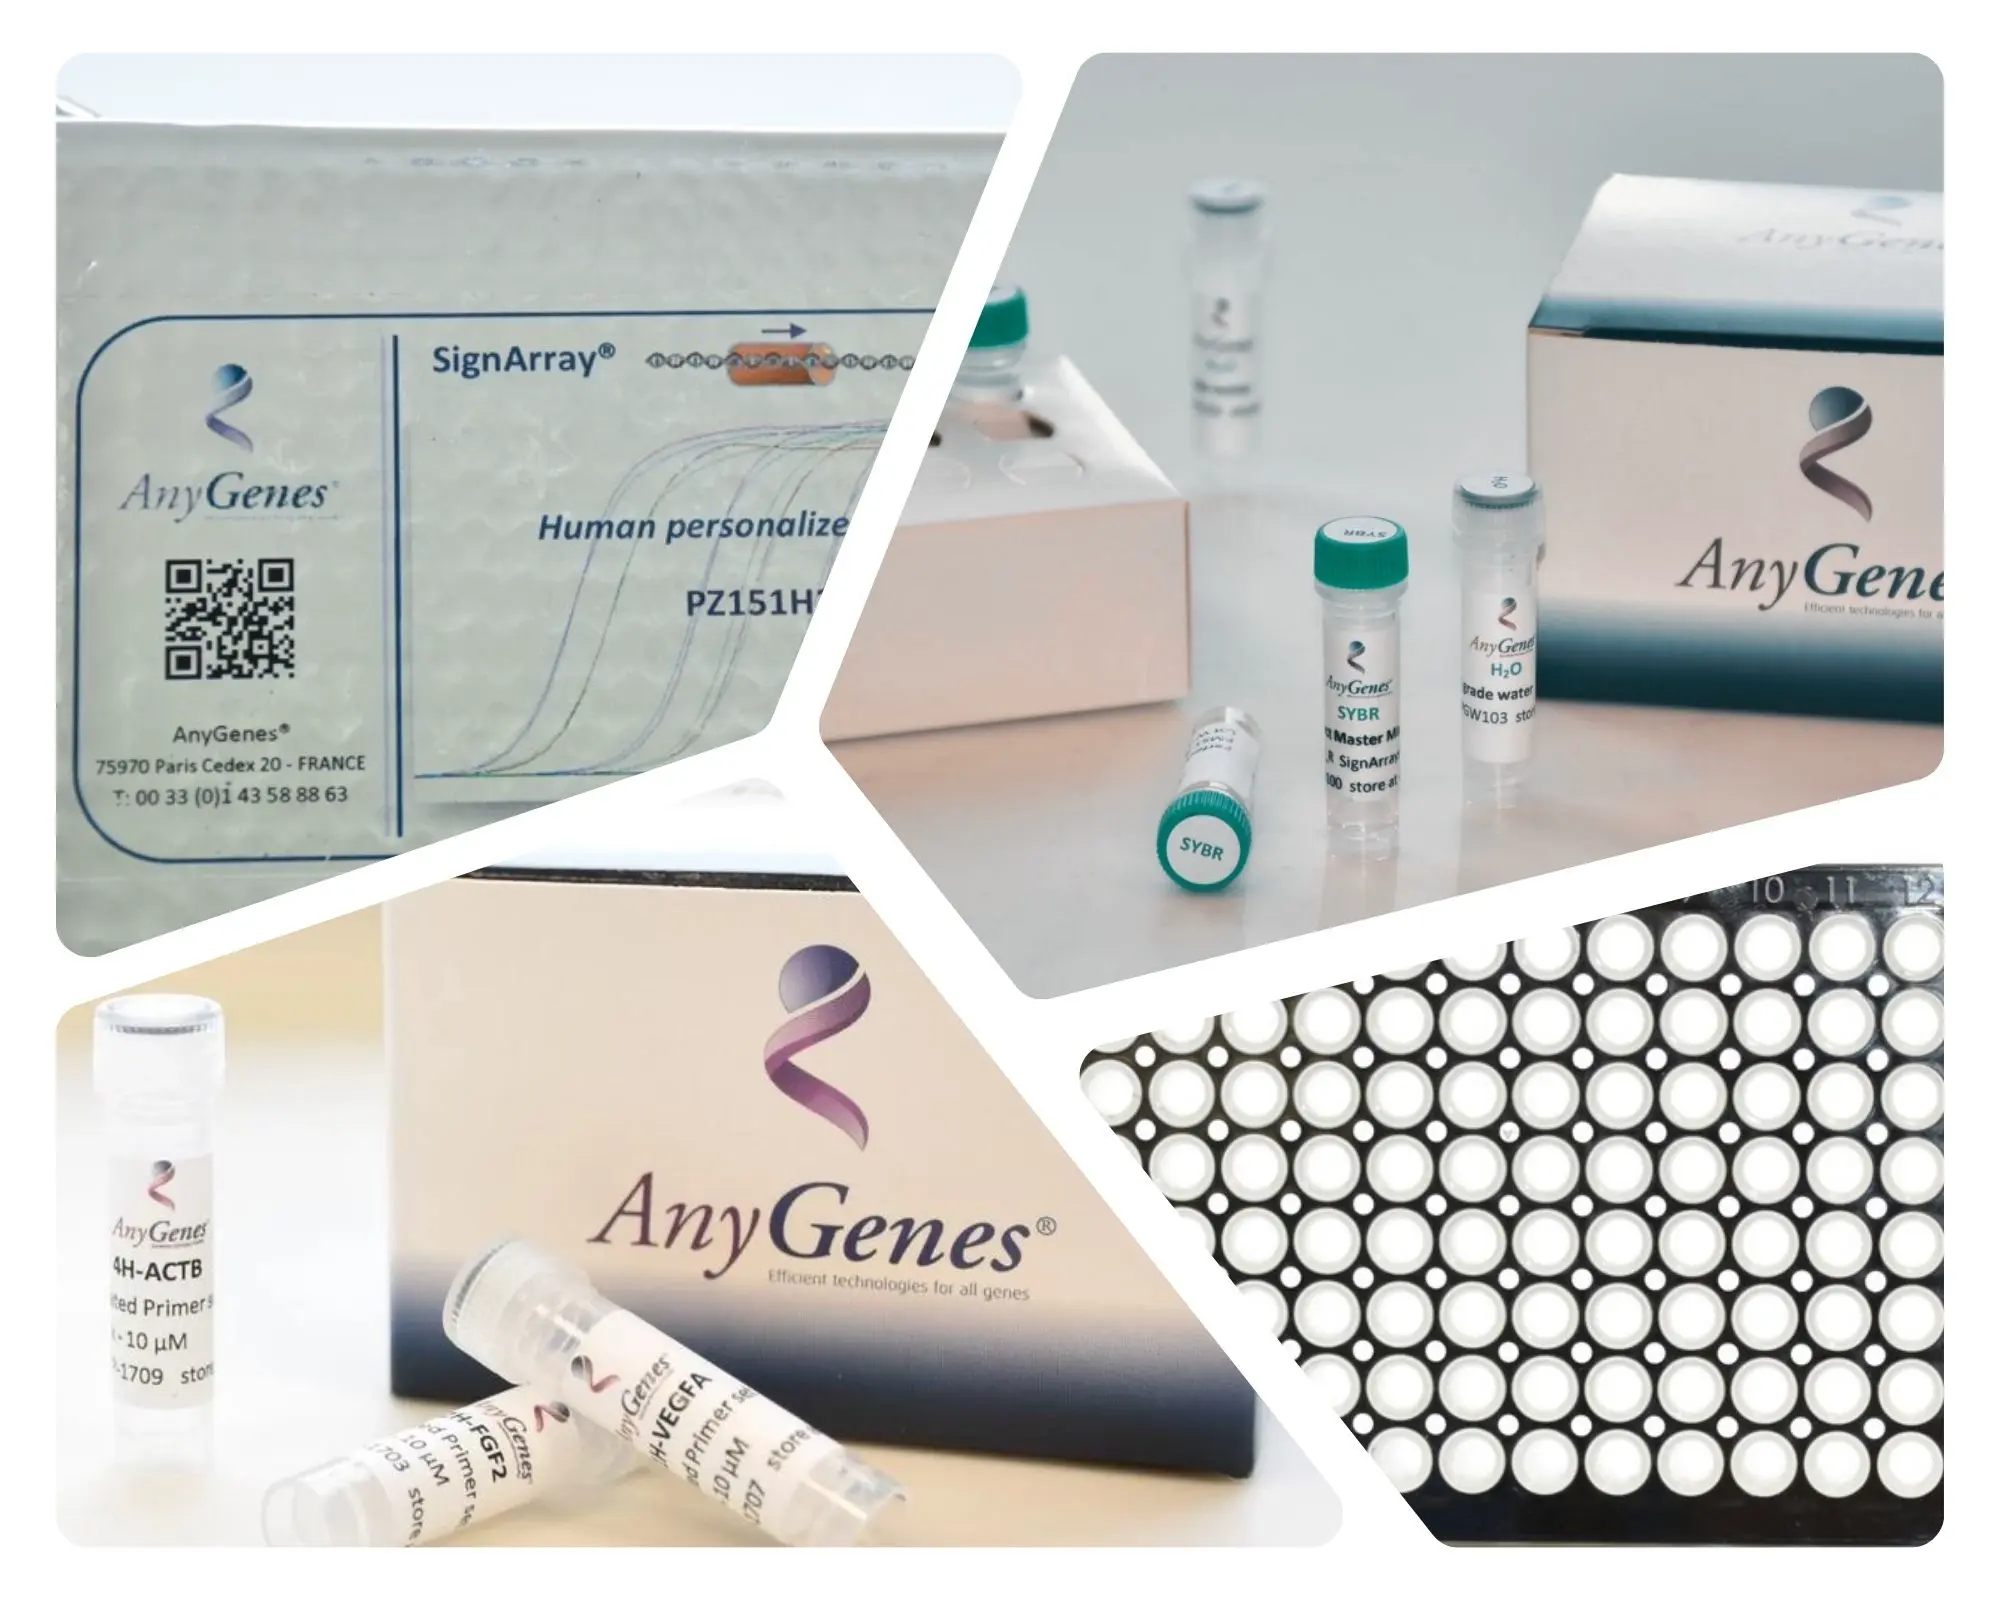 AnyGenes has developed a large catalog of molecular biology reagents and assays dedicated to gene expression, cell signaling and biomarkers profiling